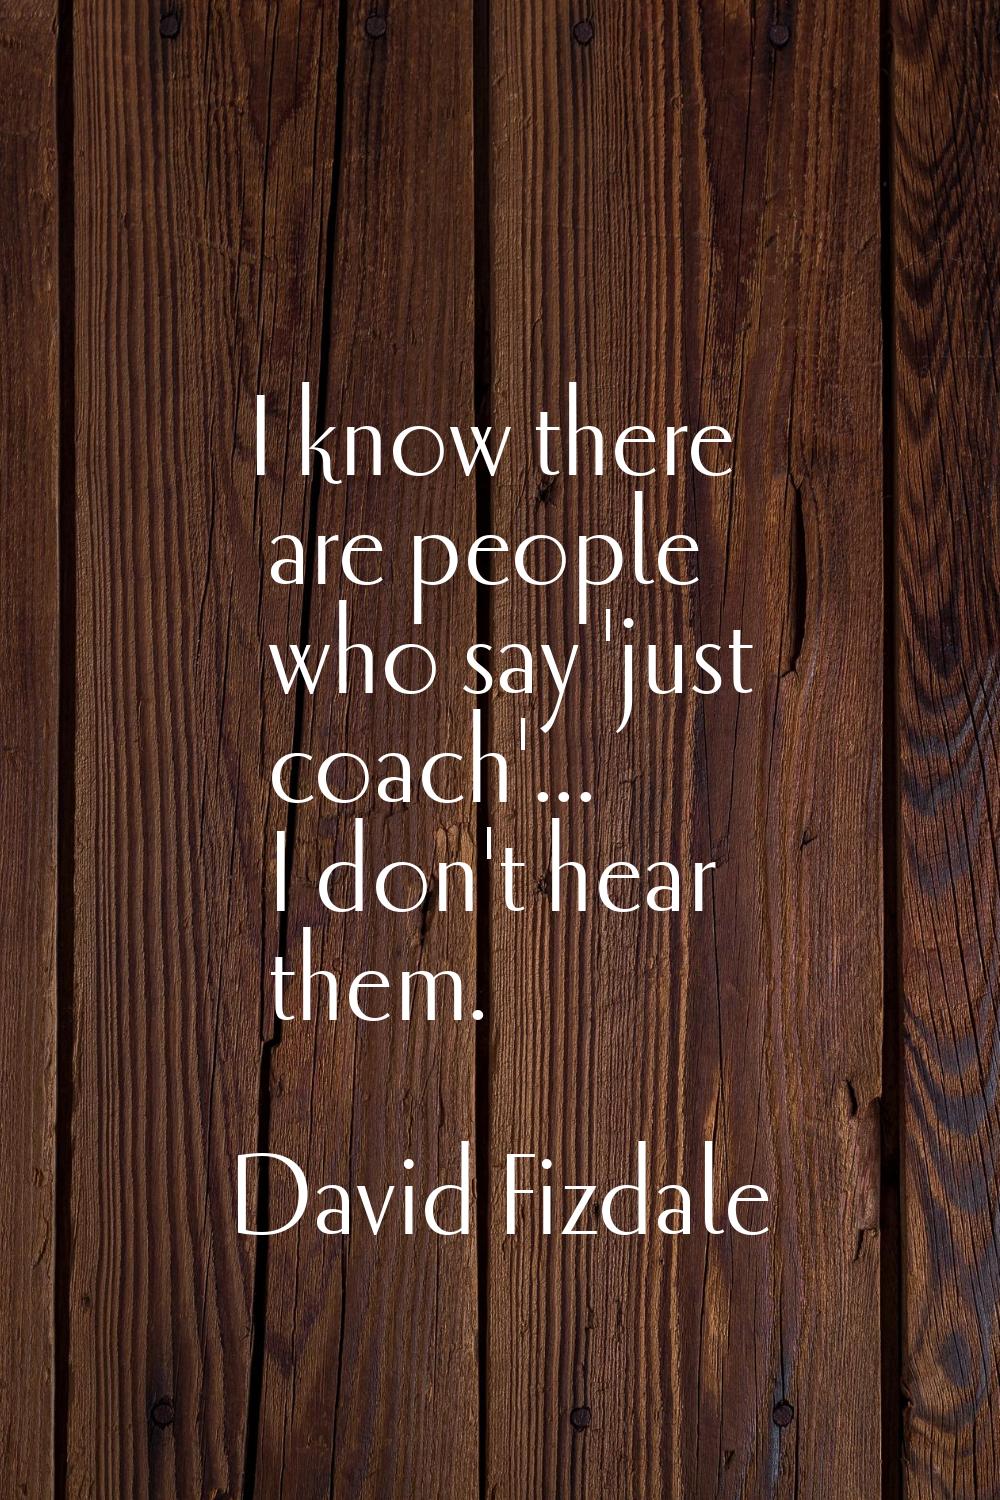 I know there are people who say 'just coach'... I don't hear them.